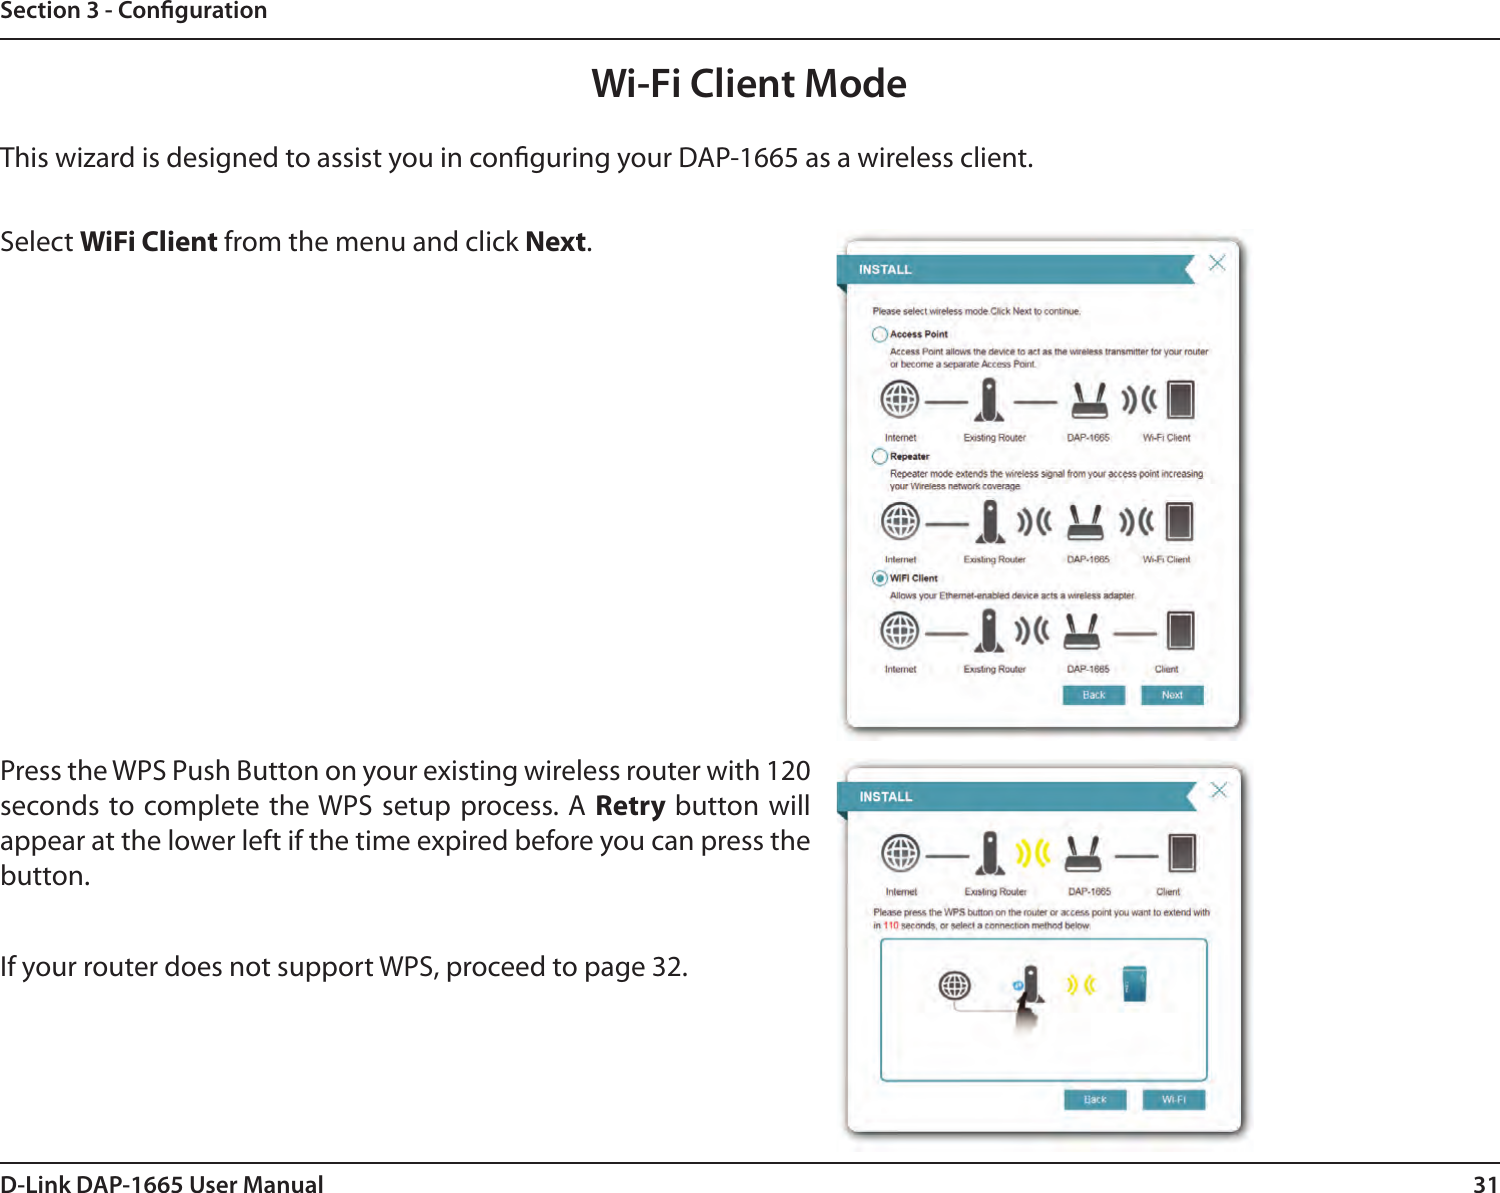 31D-Link DAP-1665 User ManualSection 3 - CongurationThis wizard is designed to assist you in conguring your DAP-1665 as a wireless client.Wi-Fi Client ModeSelect WiFi Client from the menu and click Next. If your router does not support WPS, proceed to page 32.Press the WPS Push Button on your existing wireless router with 120 seconds to complete the WPS setup process. A Retry button will appear at the lower left if the time expired before you can press the button.